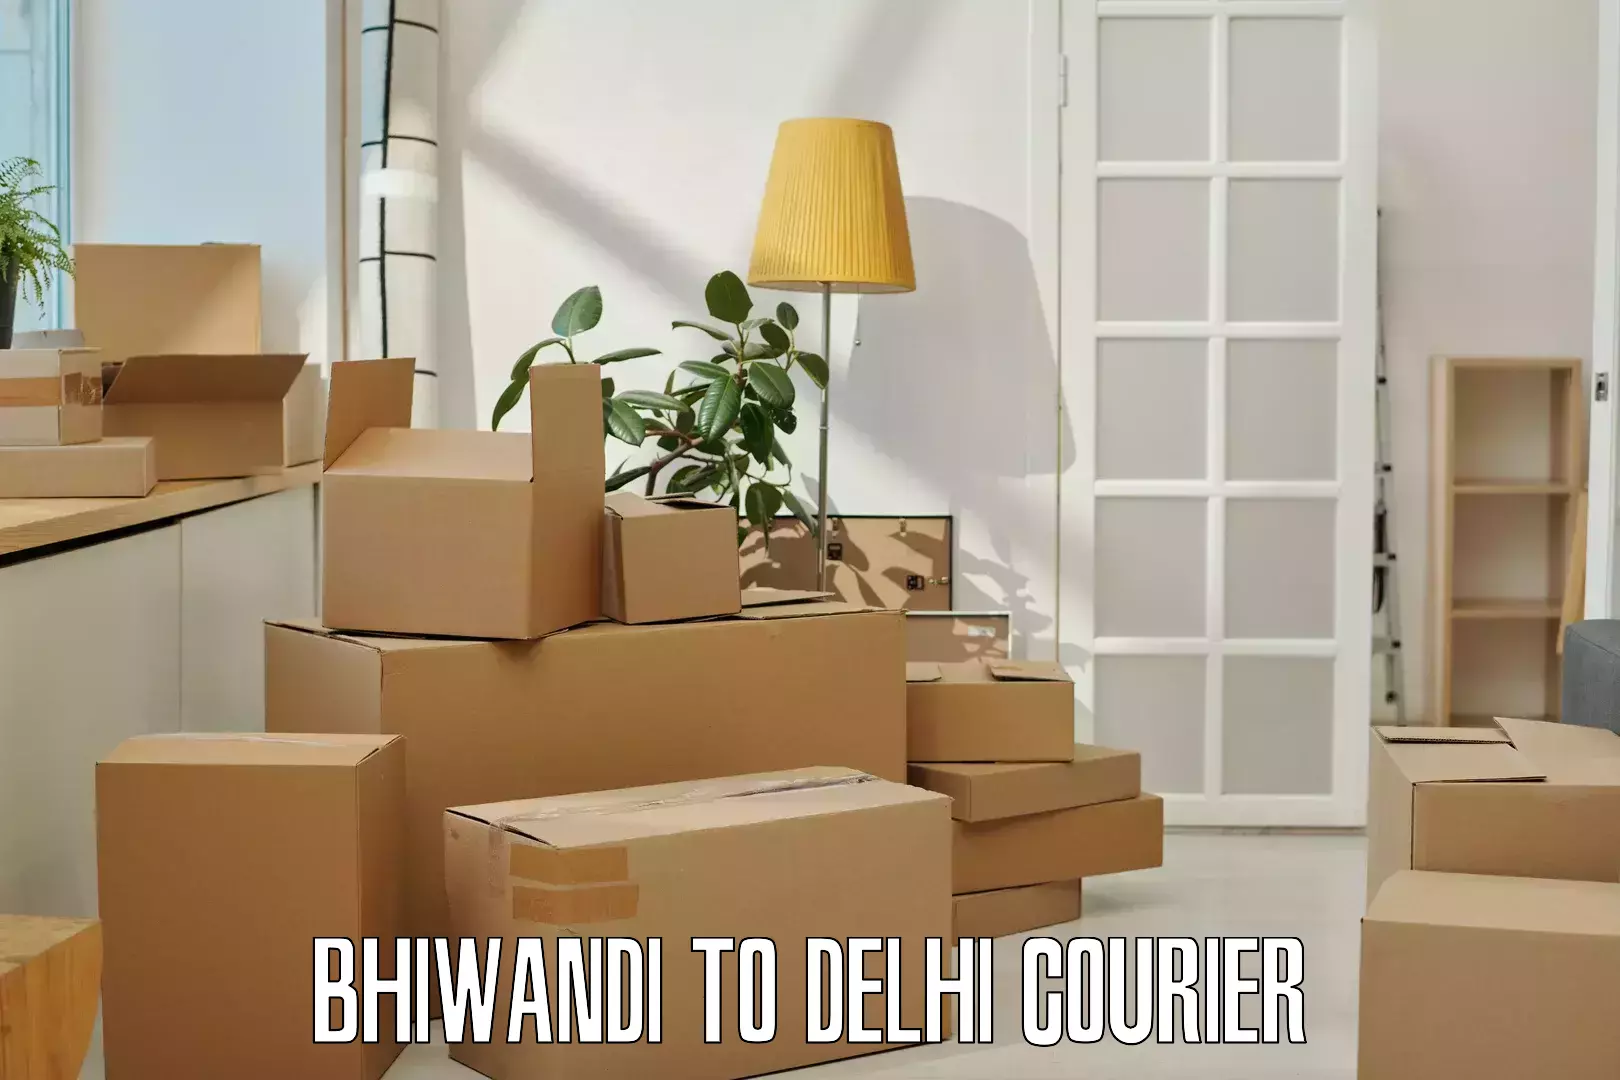 Delivery service partnership Bhiwandi to Lodhi Road